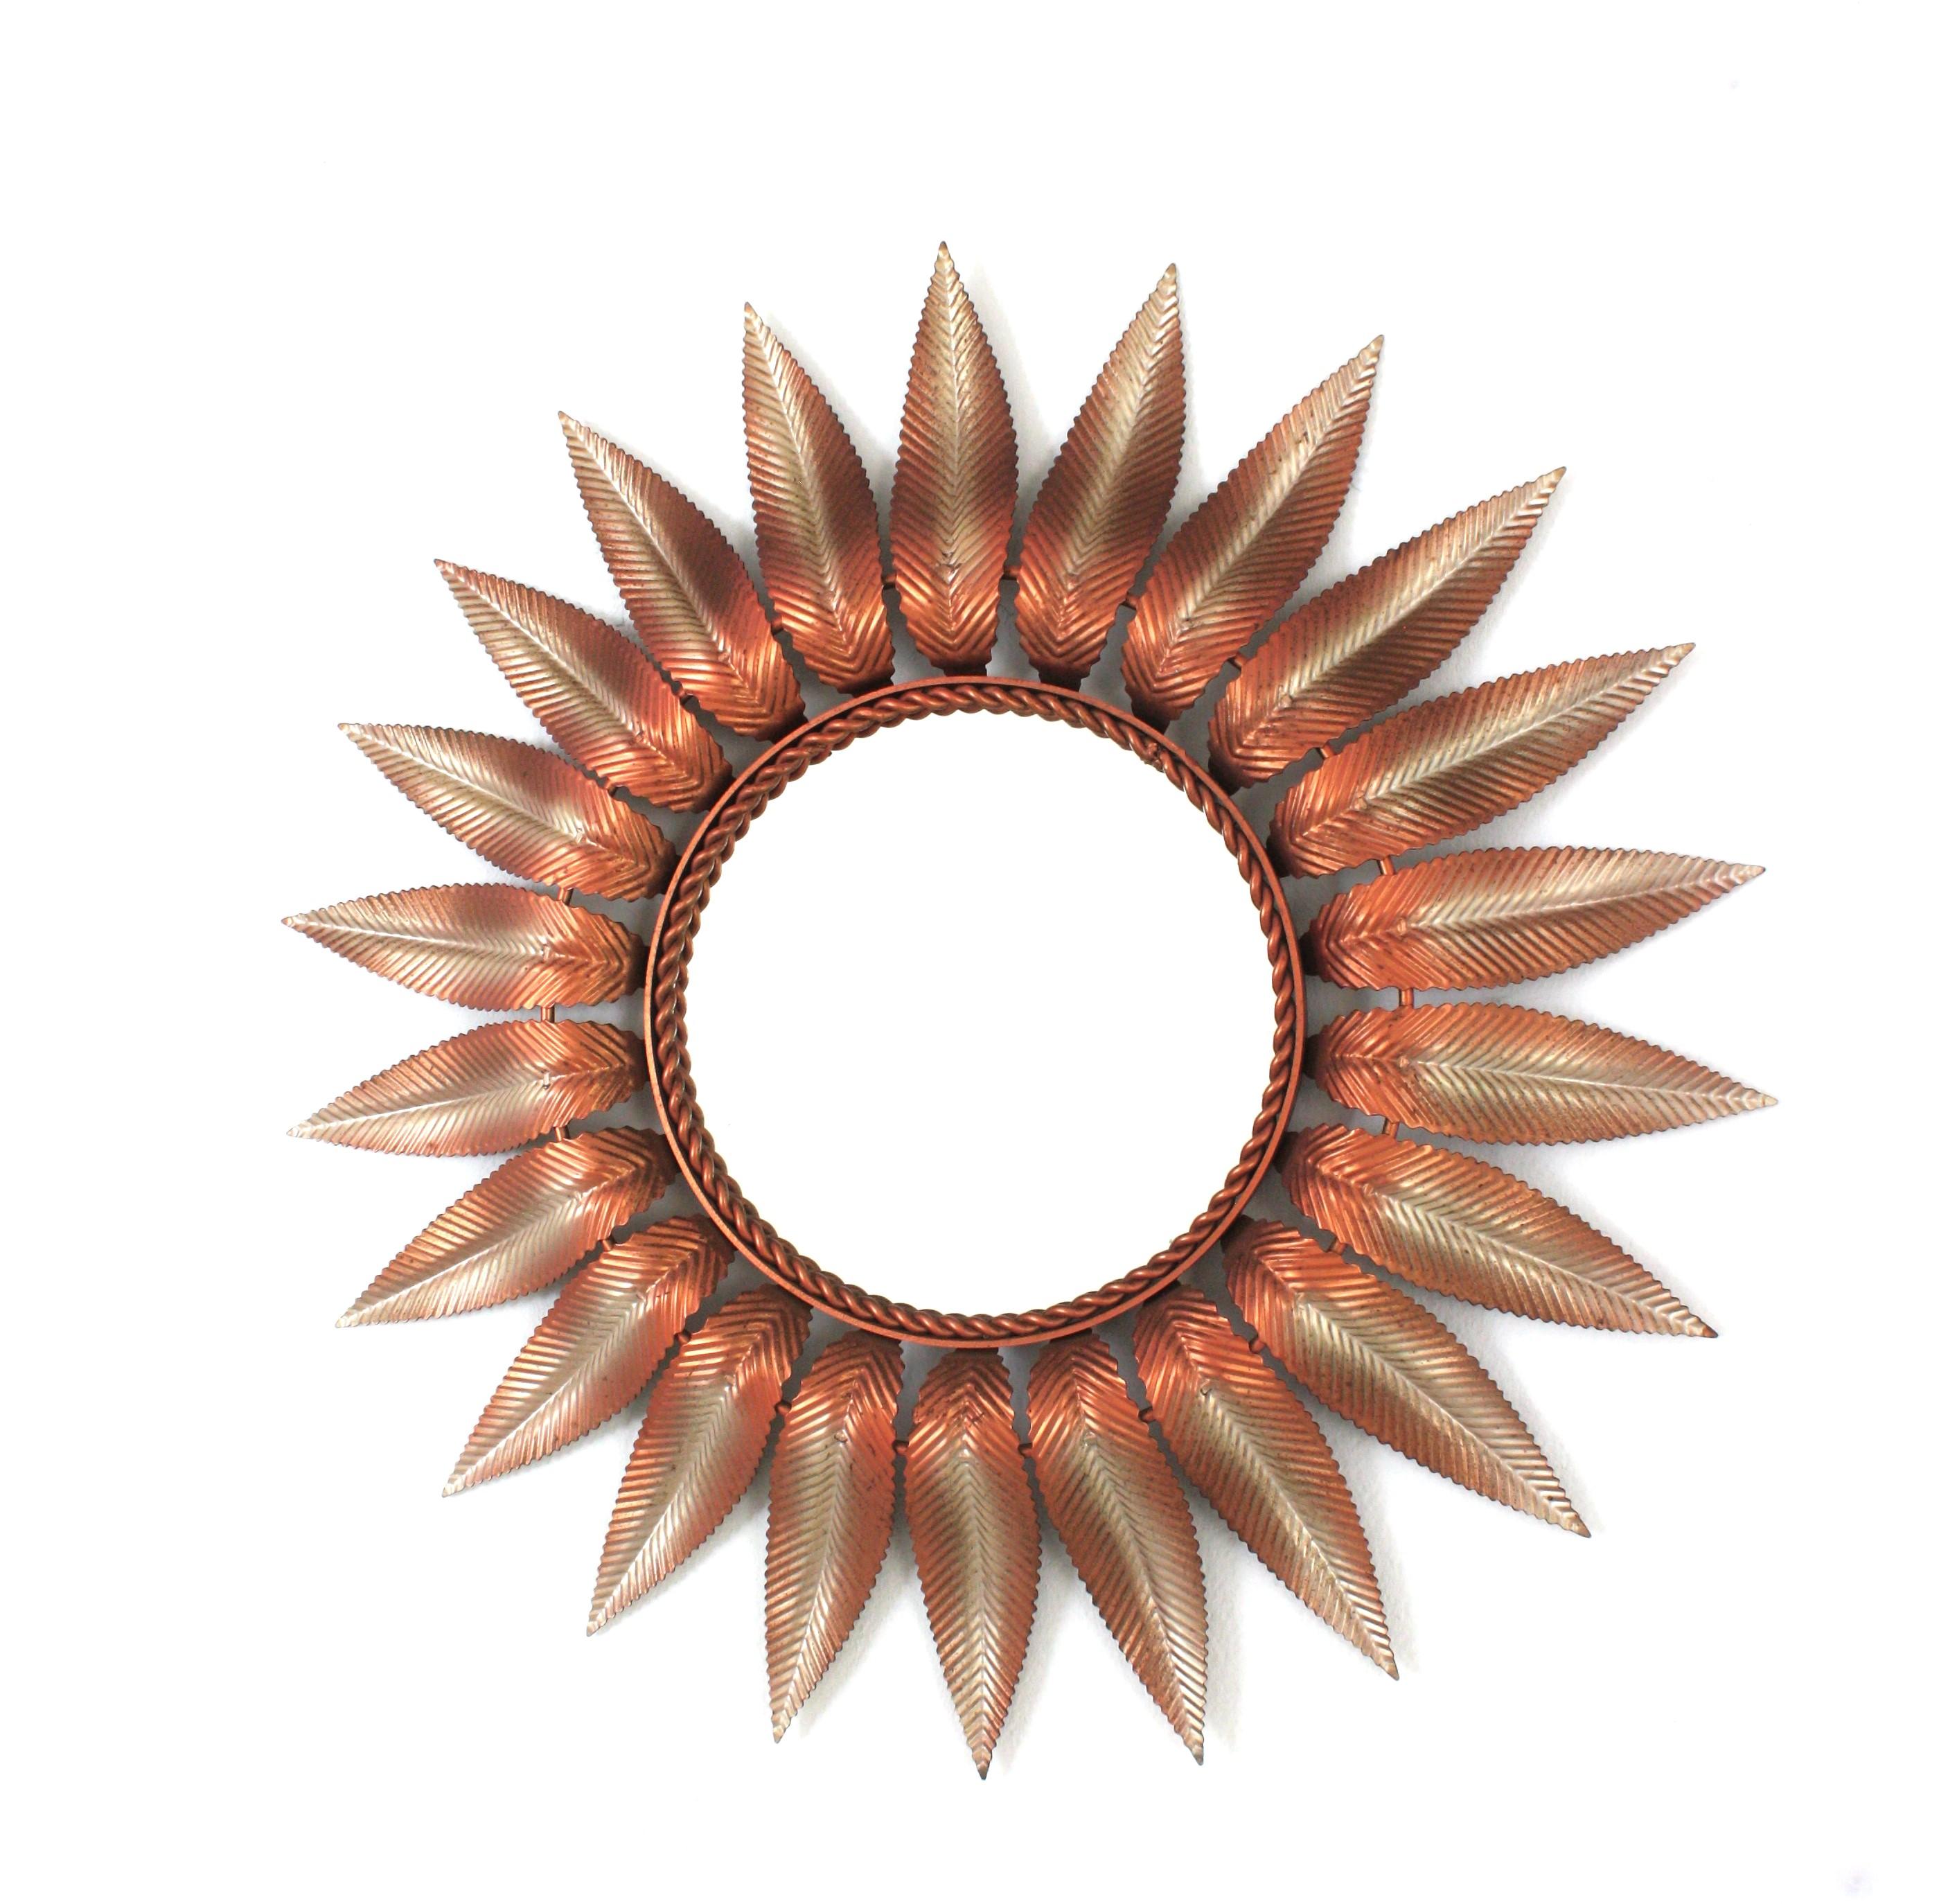 Mid-Century Modern Sunburst Flower Wall Mirror with pink and silver metal frame. Spain, 1960s.
This wall mirror features a layers of pinkish leaves with gilt silver accents surrounding a central glass.
Unique piece in these colors.
Very good vintage